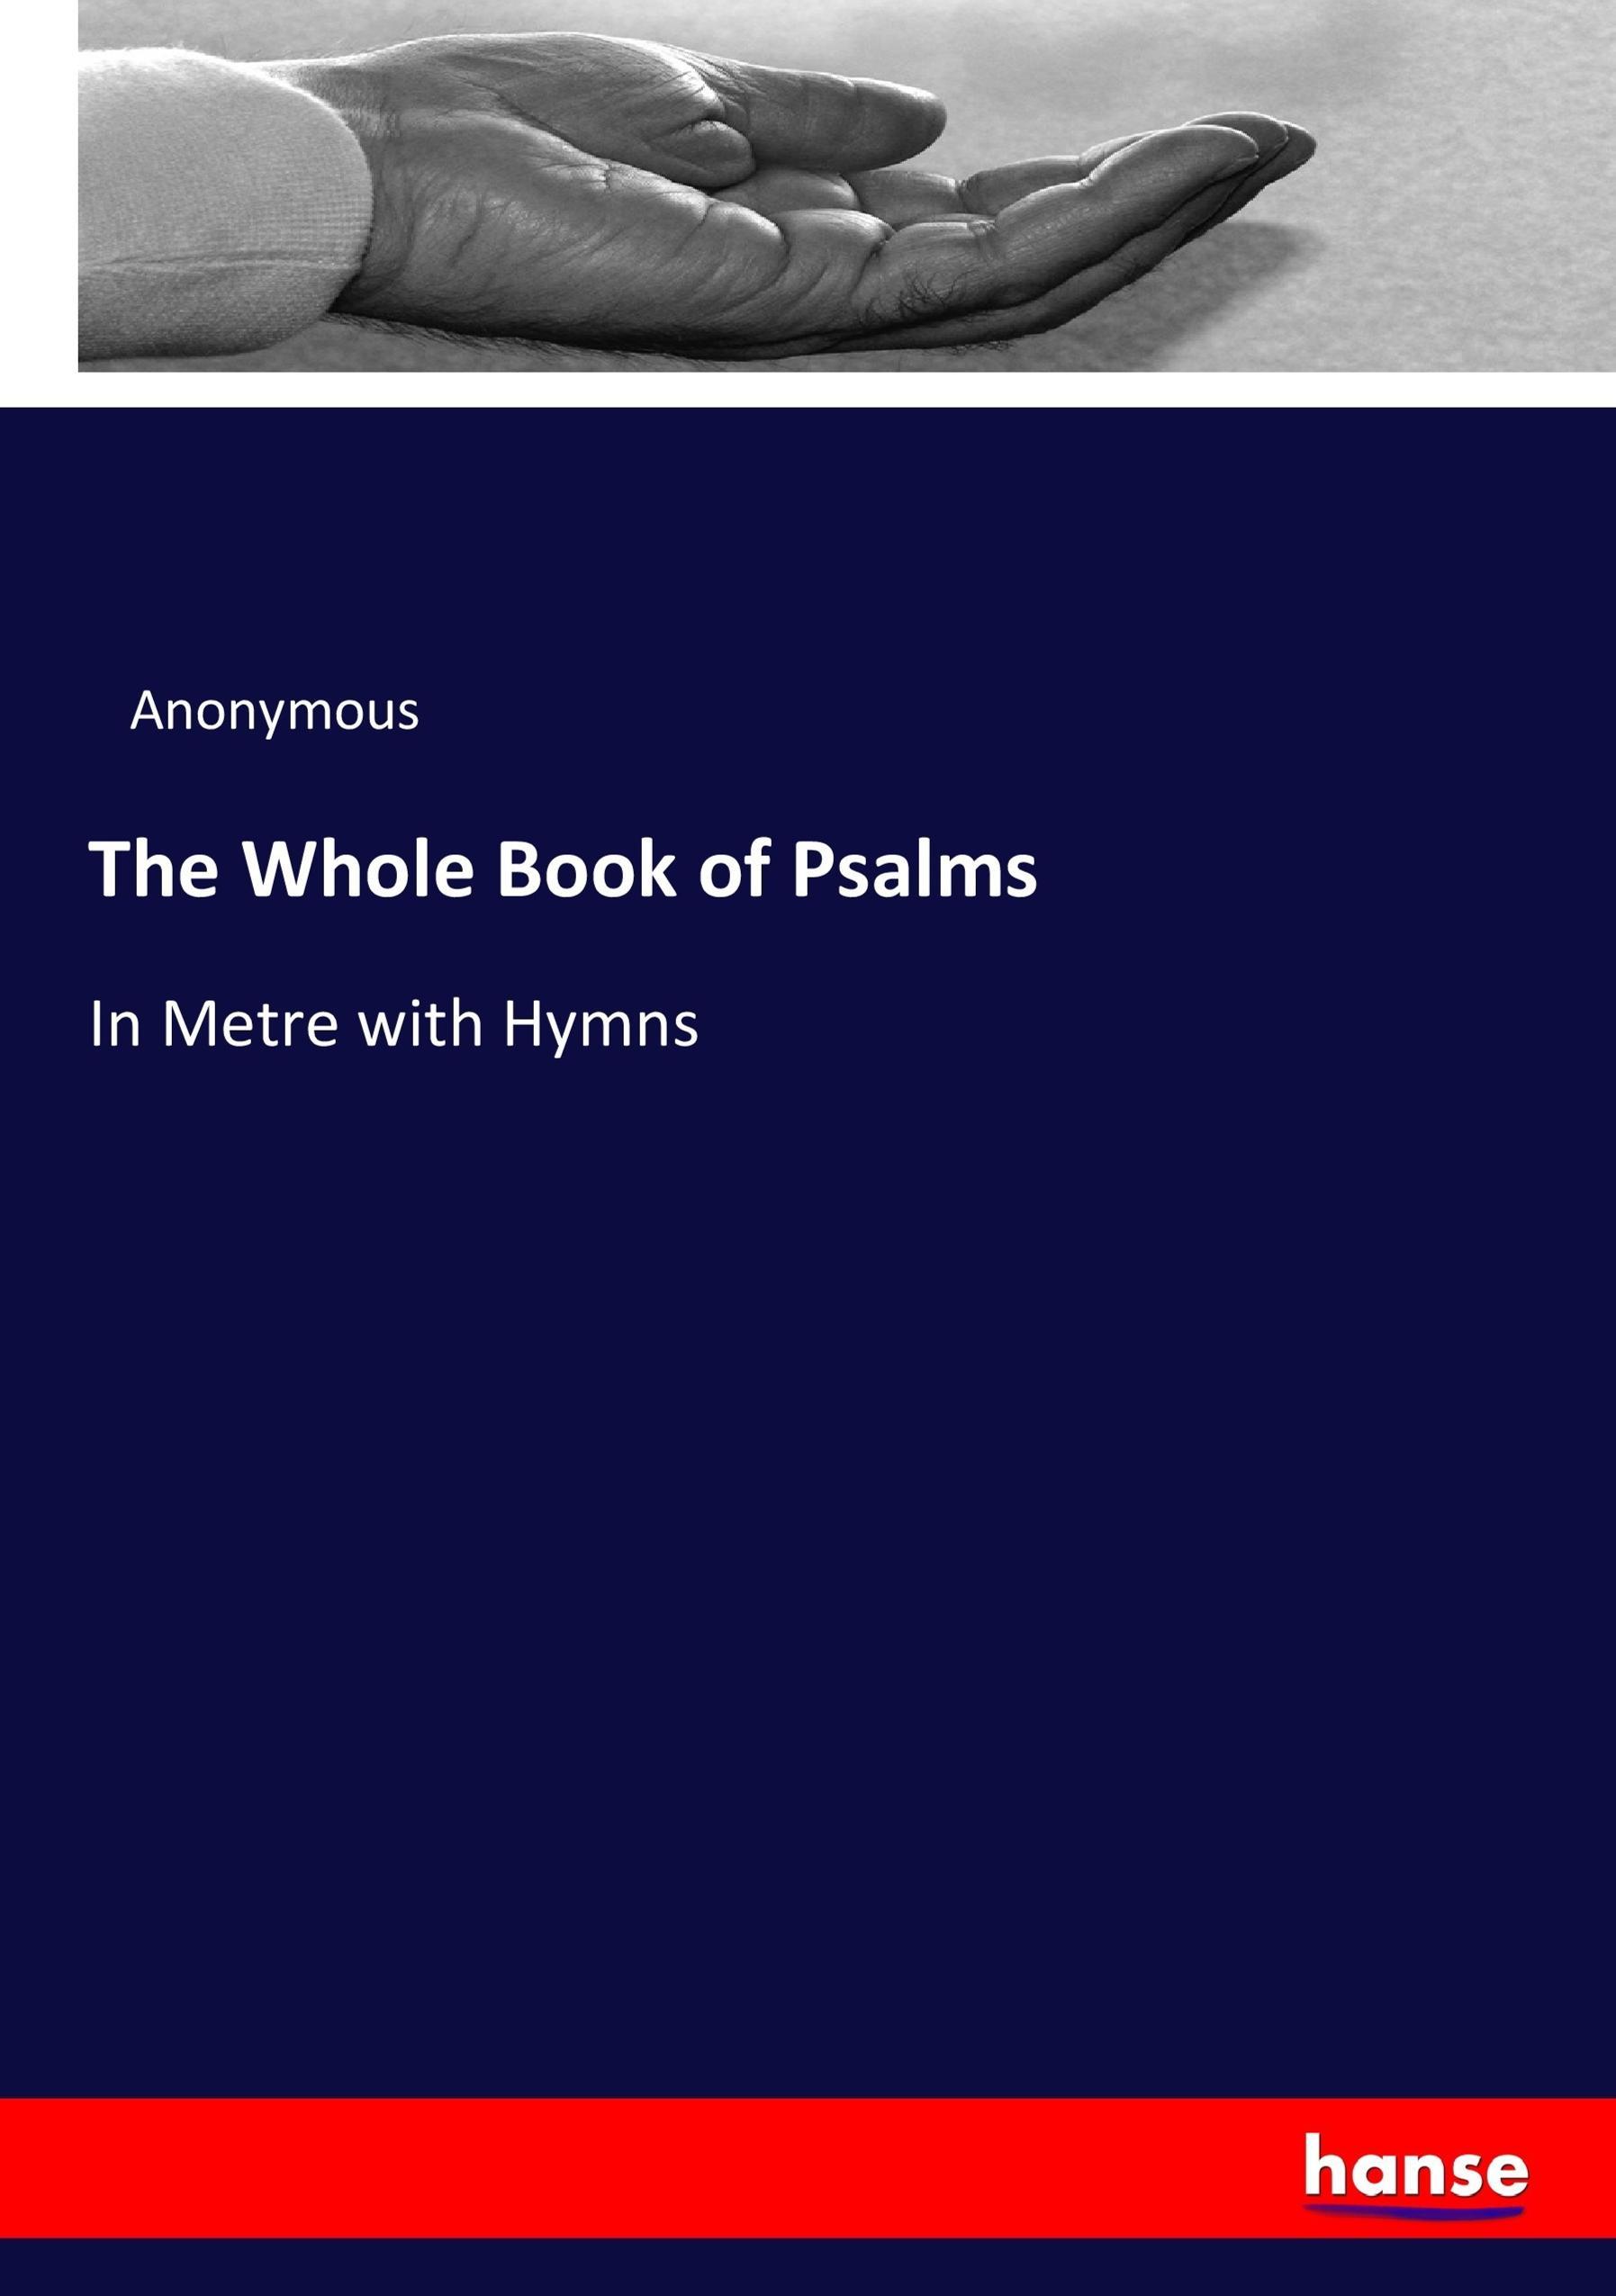 The Whole Book of Psalms - Anonym